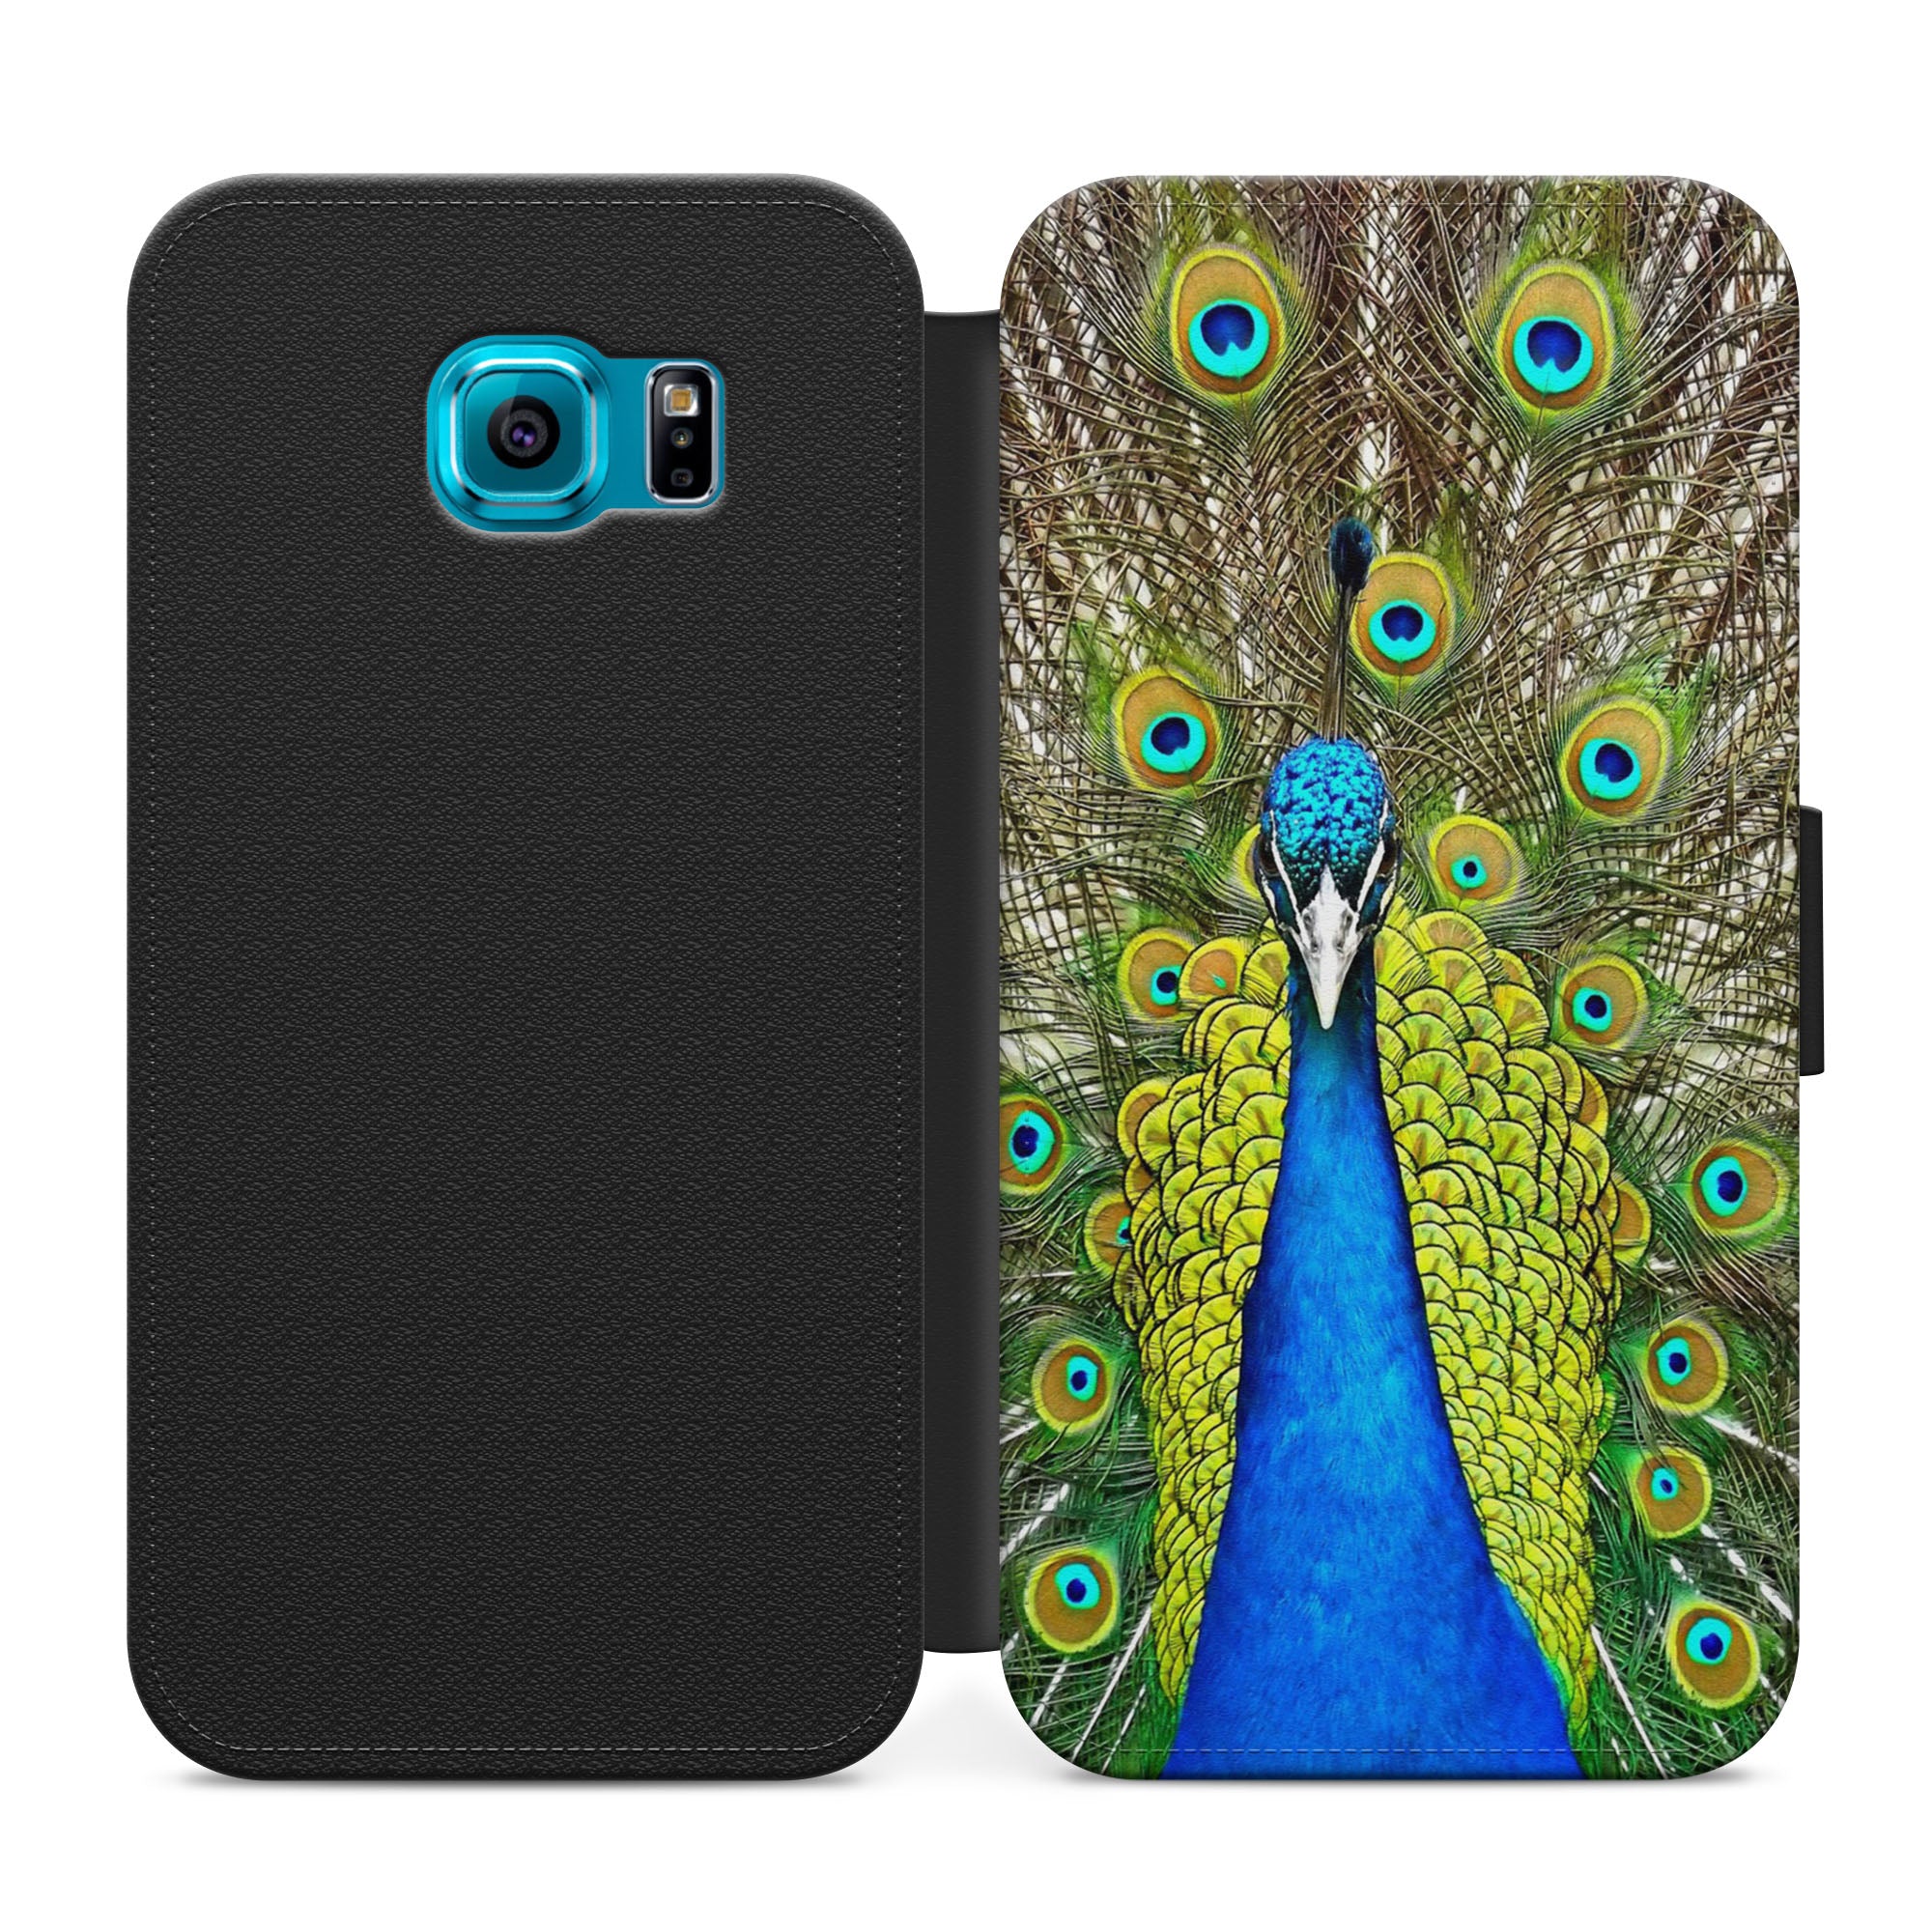 Colourful Peacock Faux Leather Flip Case Wallet for iPhone / Samsung